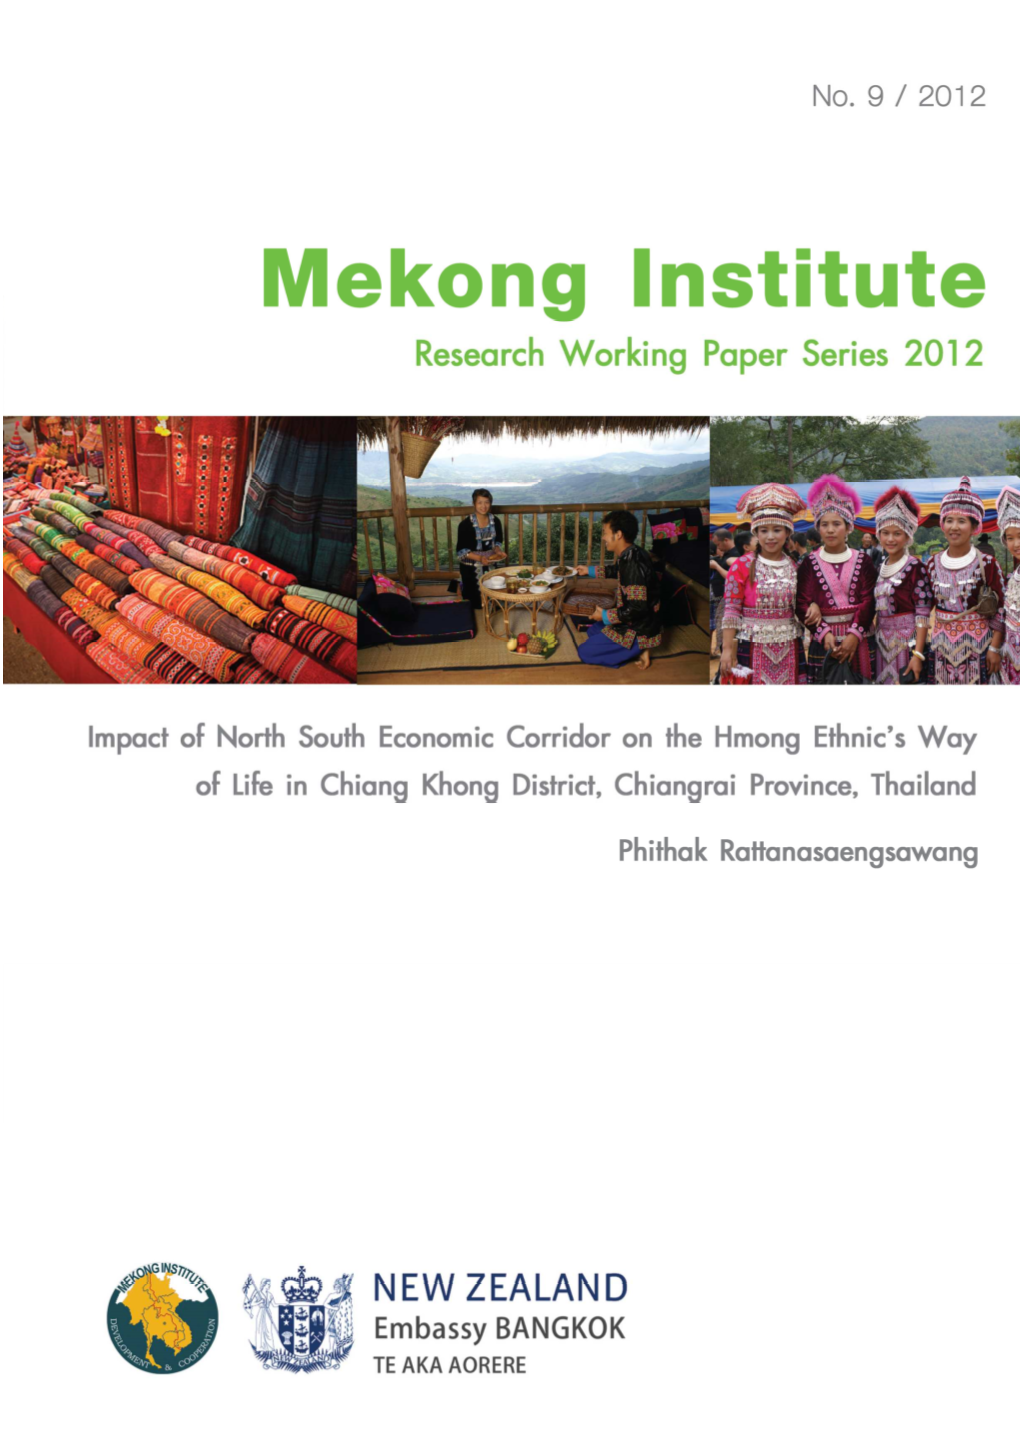 Impact of North South Economic Corridor on the Hmong Ethnic’S Way of Life in Chiang Khong District, Chiangrai Province, Thailand